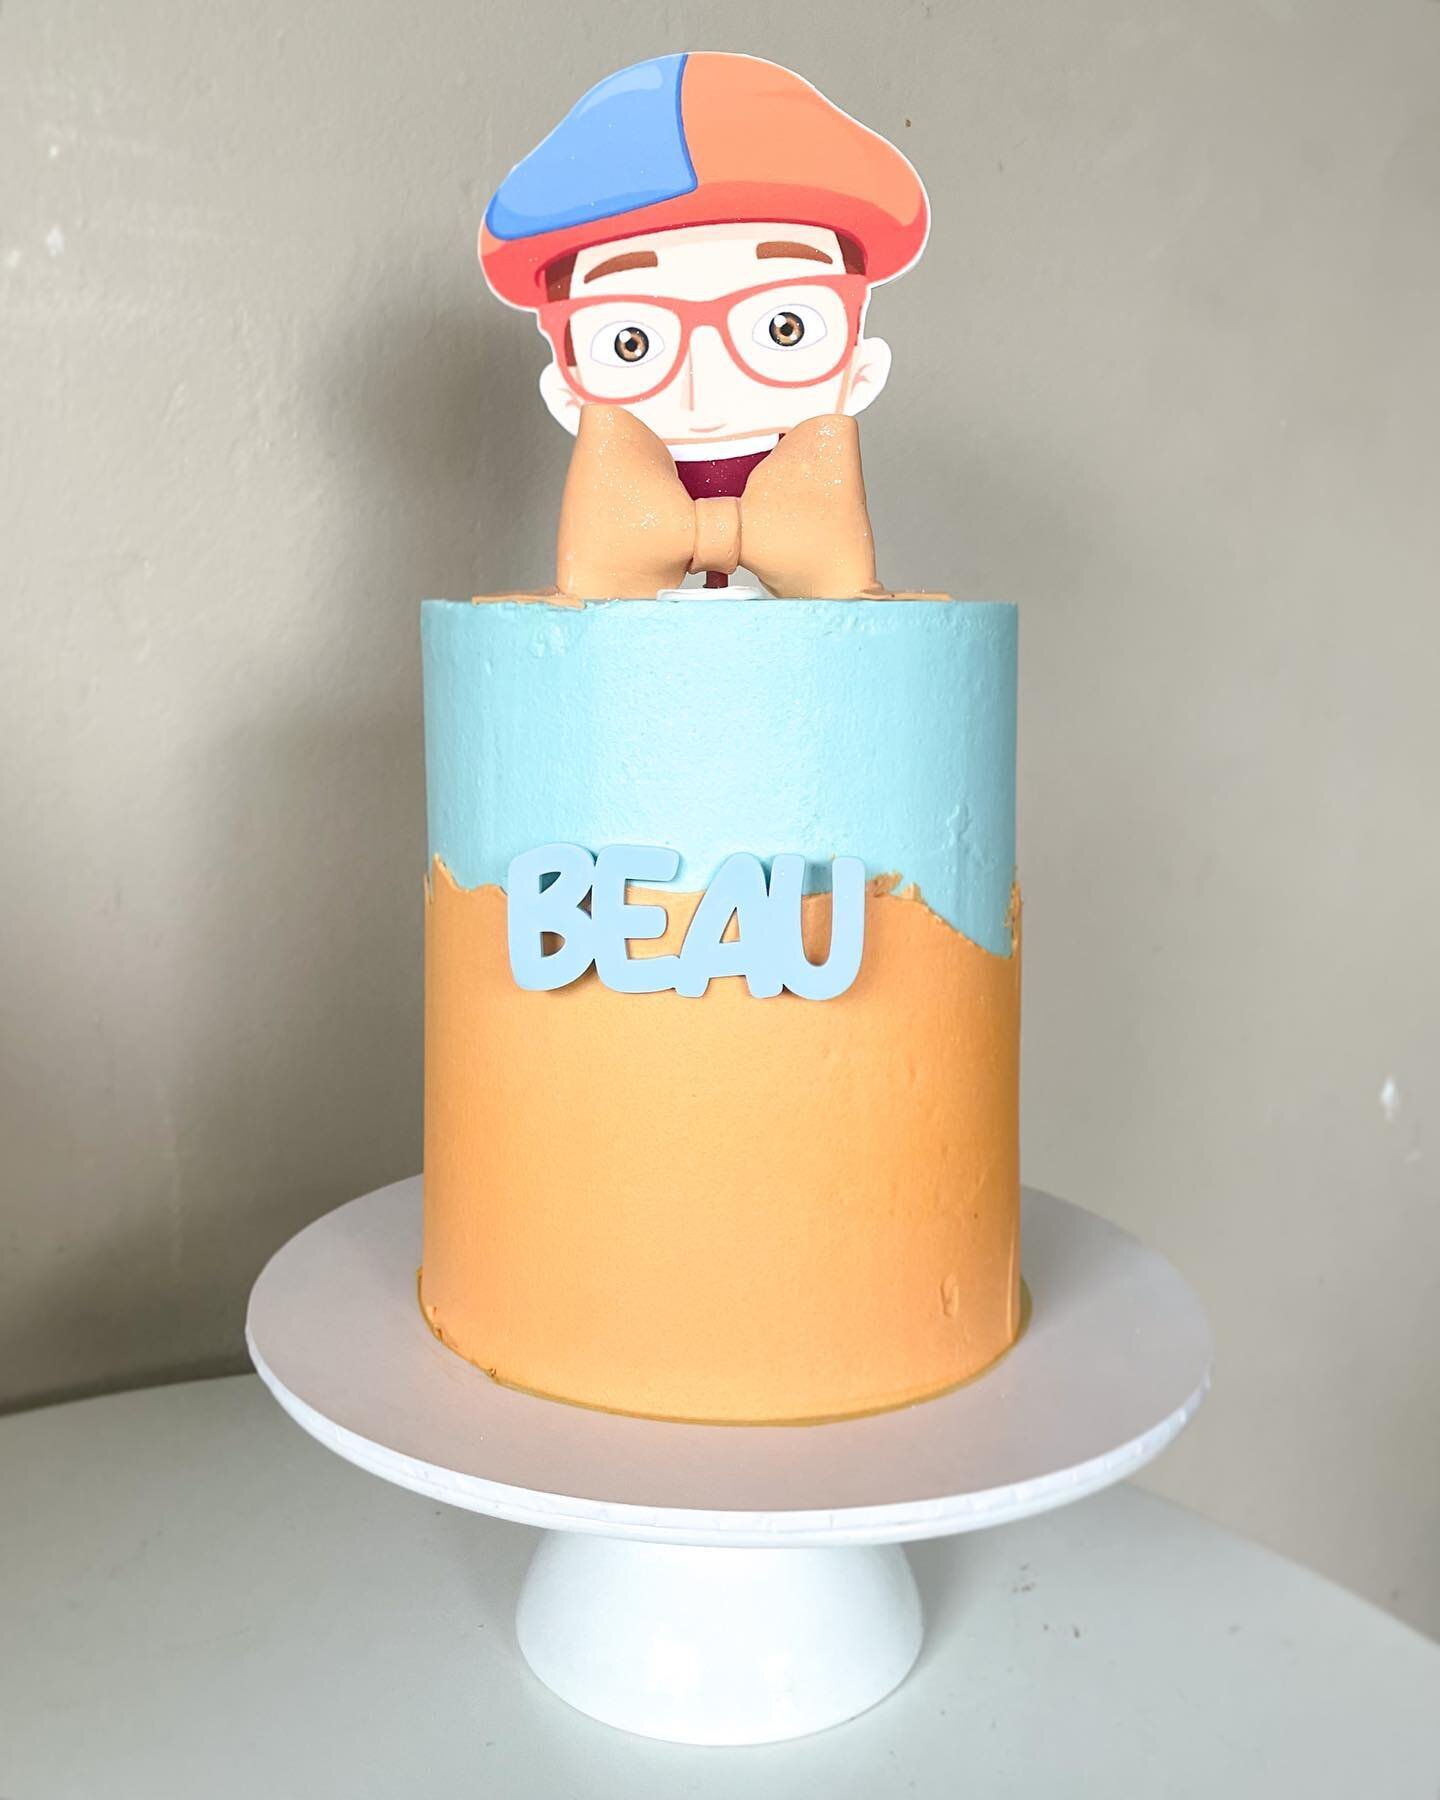 Goal for 2023&hellip; Get a picture and post every single cake I make! 

Blippi cake for Beaus Birthday! 

Blippi Topper - @personalisedbypip 
Name Topper - @lilycharlottecrafts